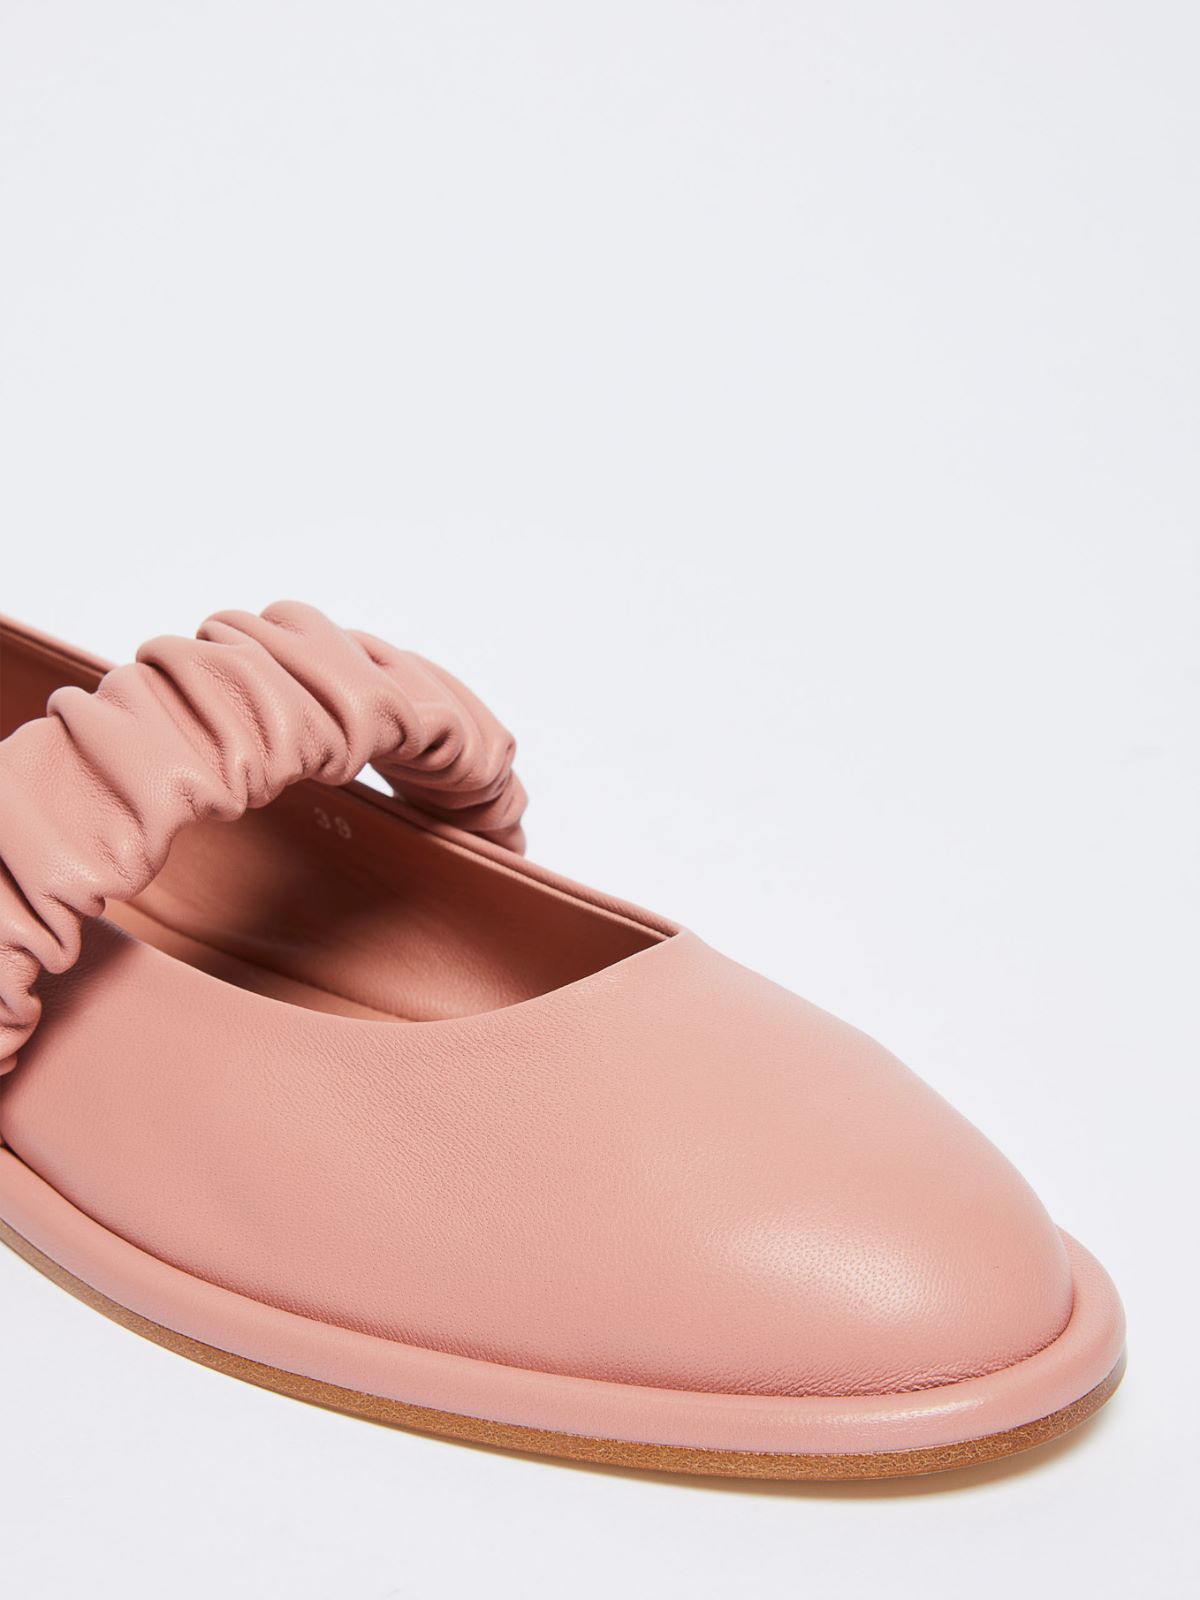 Ballet flats in nappa leather - ANTIQUE ROSE - Weekend Max Mara - 4